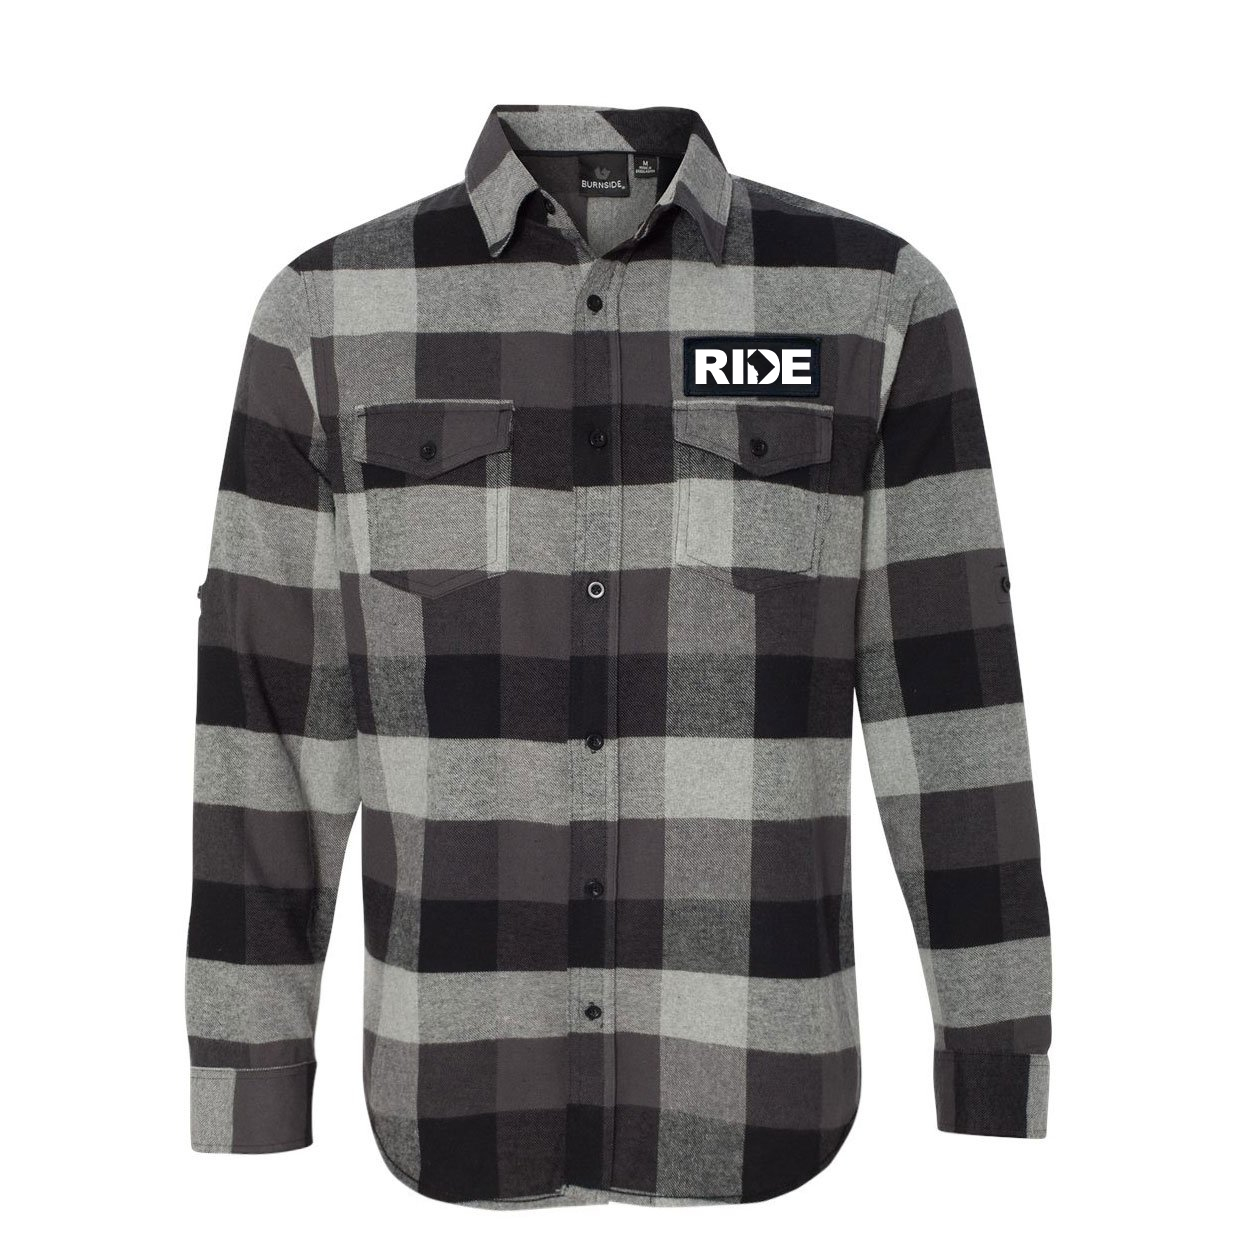 Ride District of Columbia Classic Unisex Long Sleeve Woven Patch Flannel Shirt Black/Gray (White Logo)